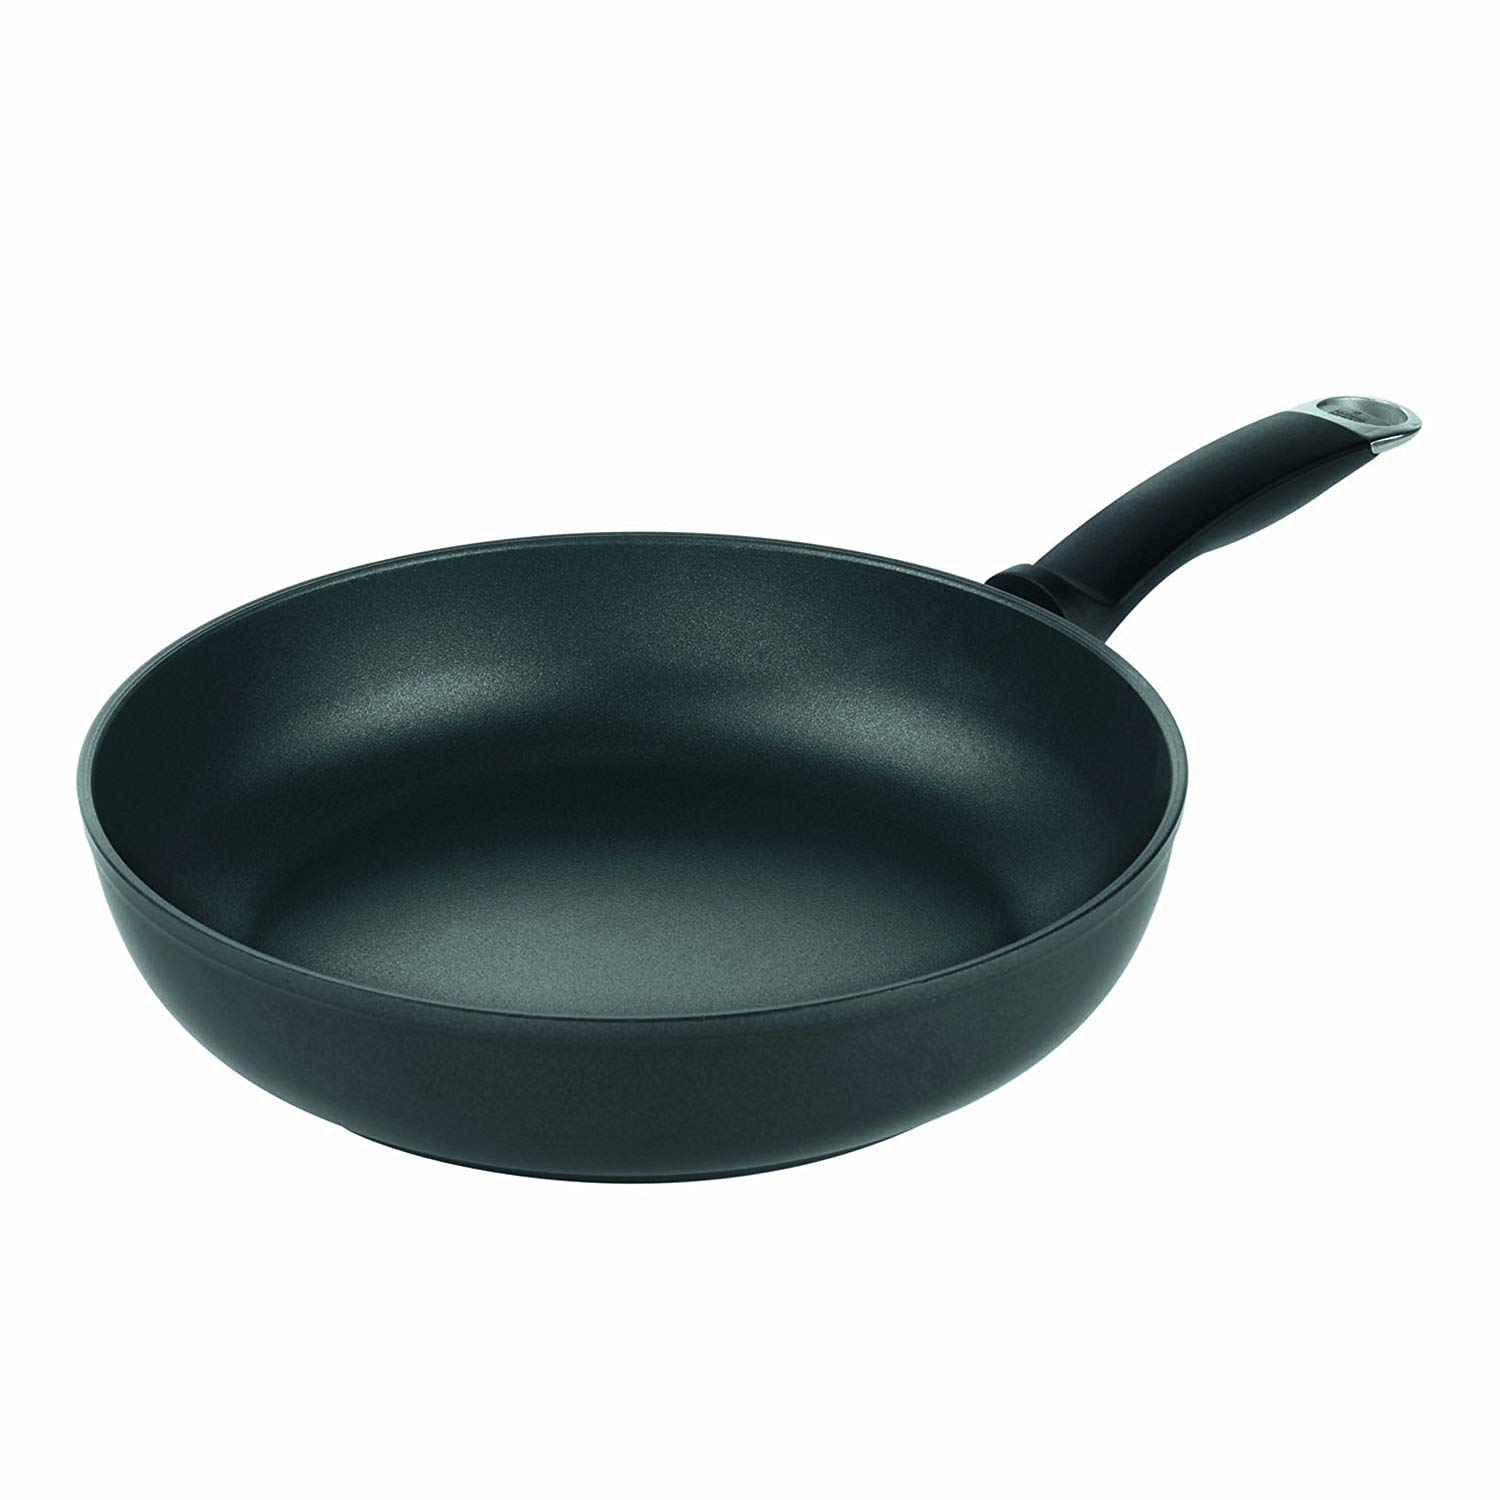 Kuhn Rikon Gourmet Induction Frying Pan Suitable for Induction Cookers